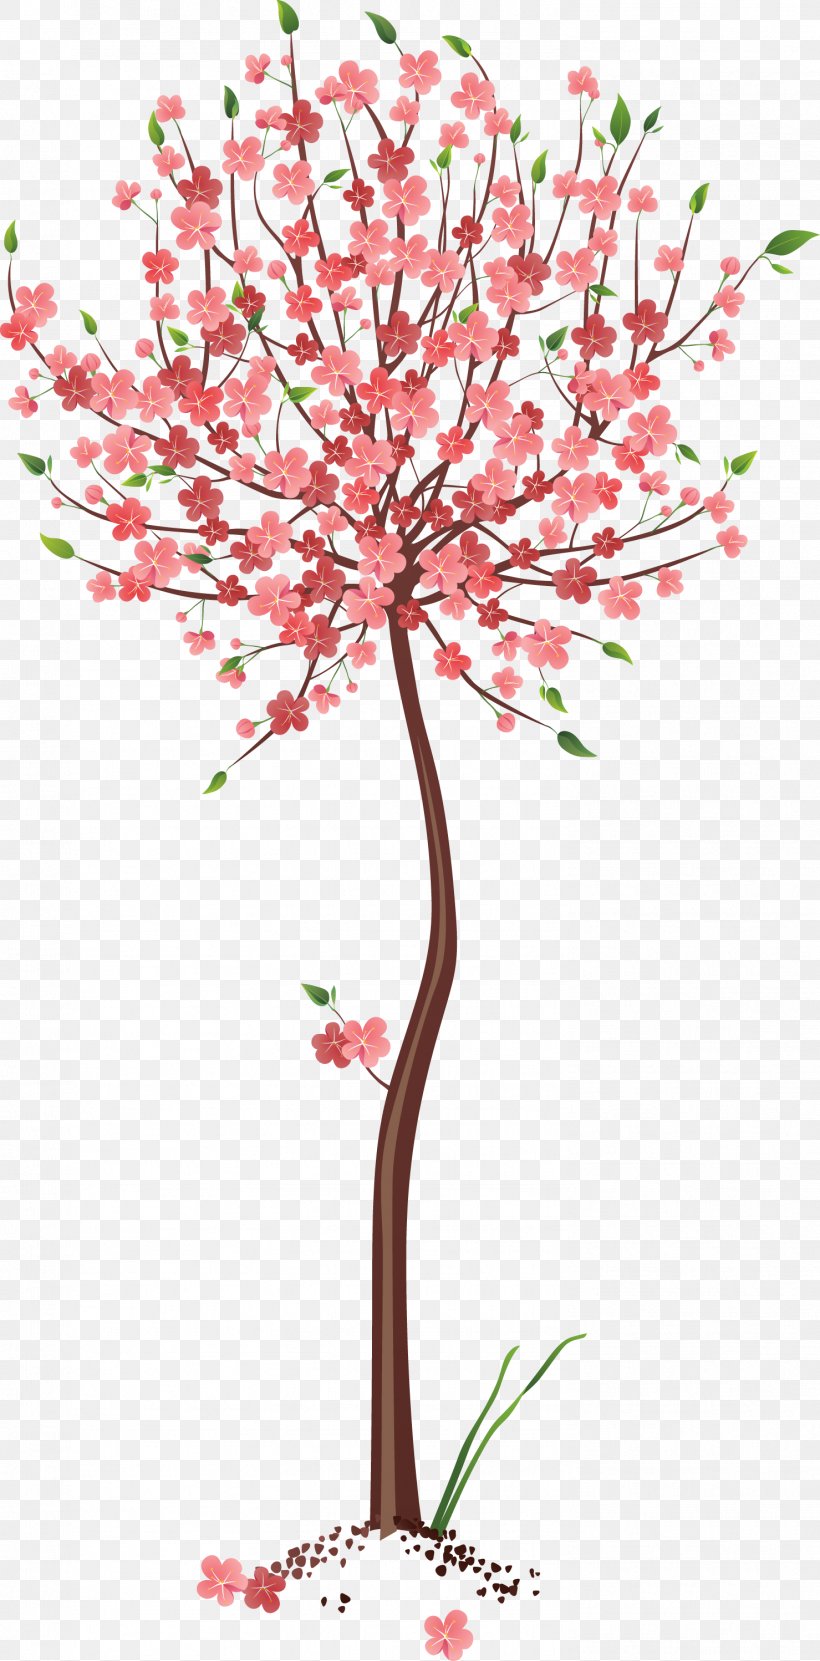 Clip Art Image Tree Drawing, PNG, 1479x2996px, Tree, Art, Autumn, Blossom, Branch Download Free